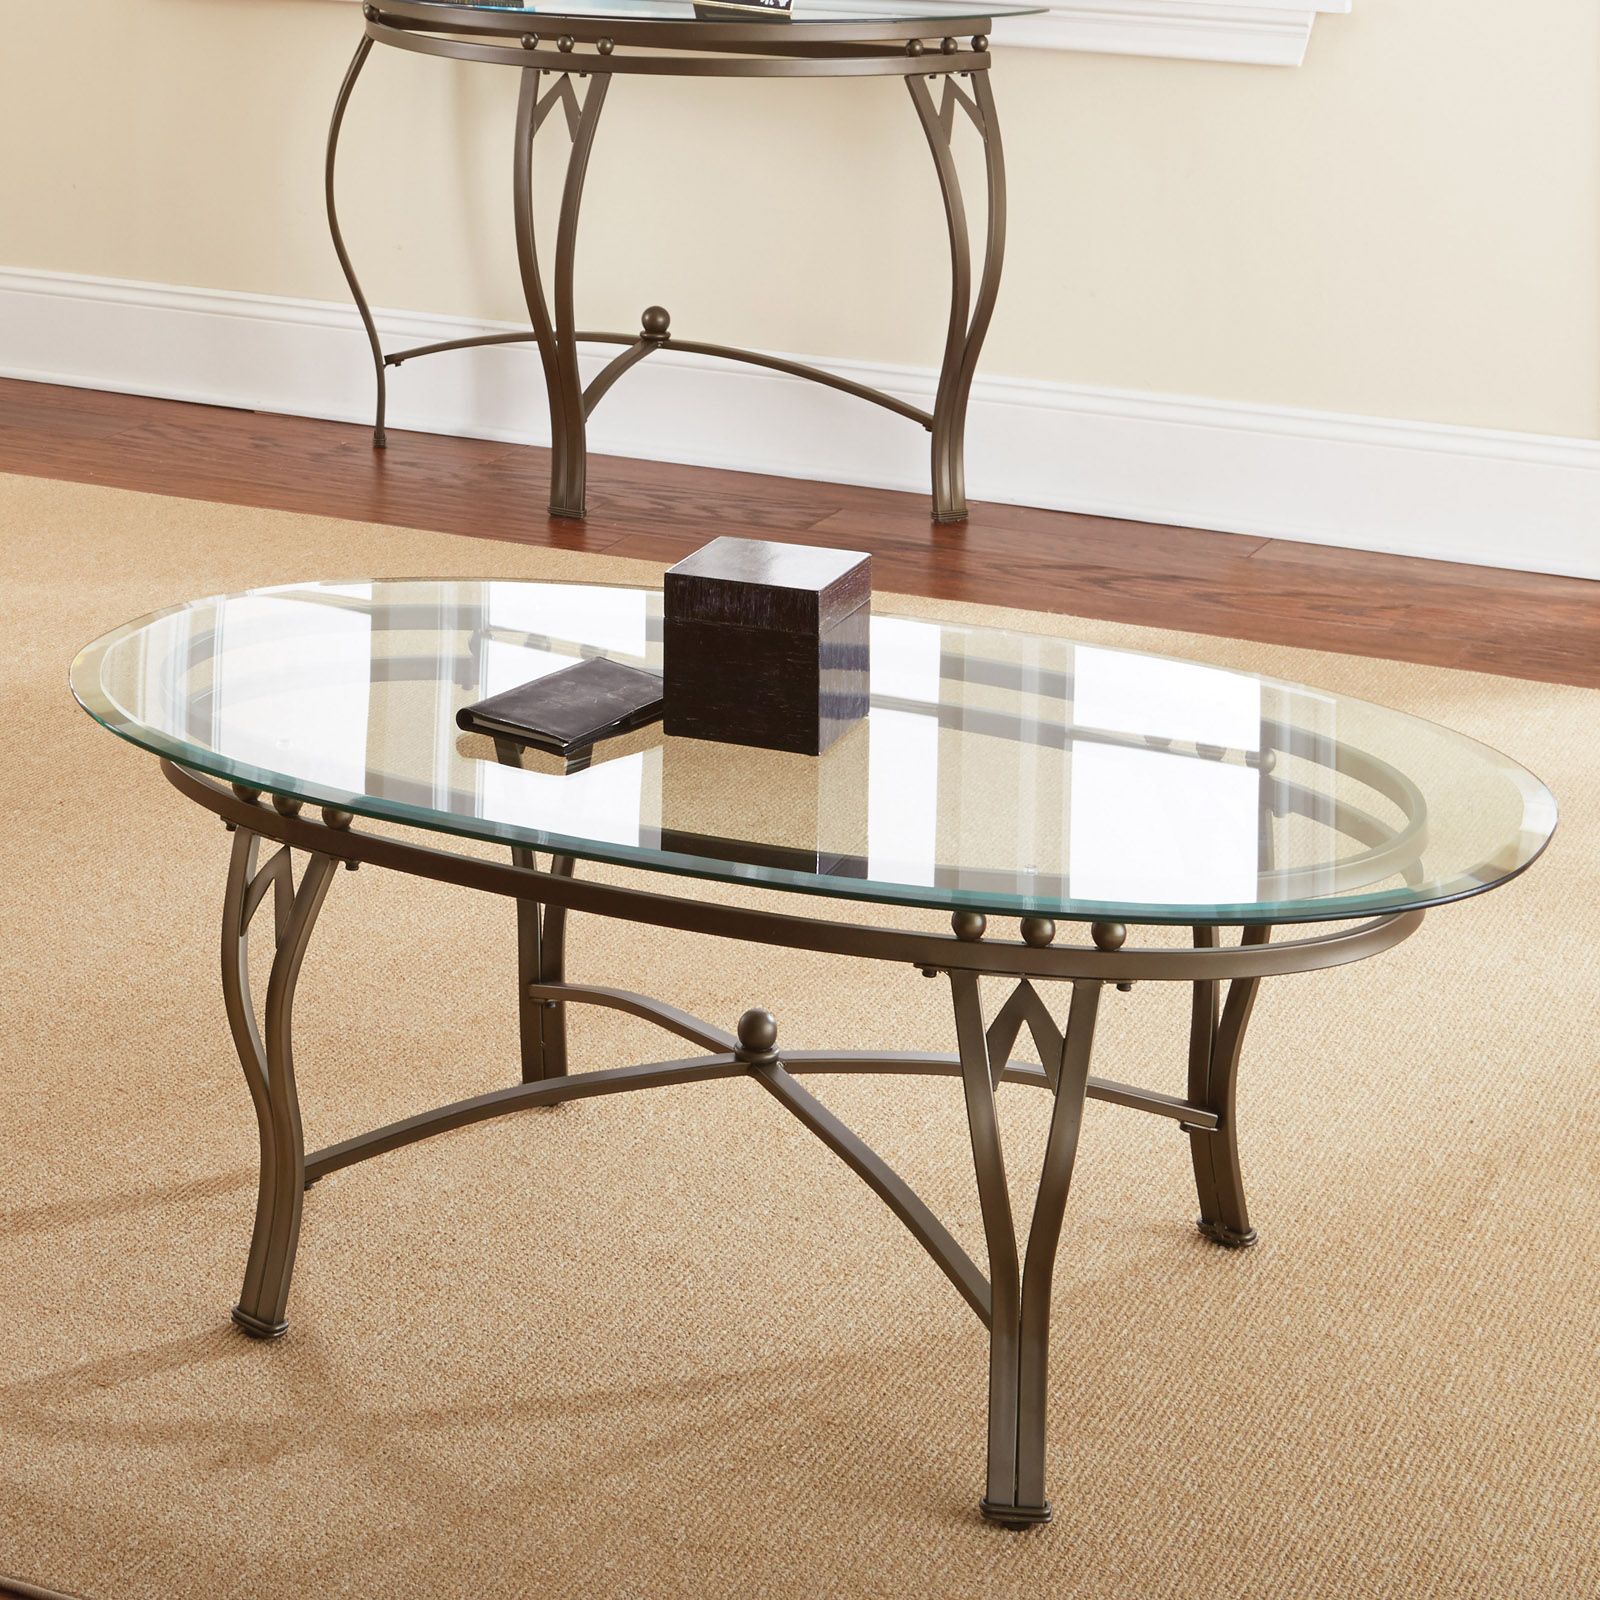 Silver Coffee Tables Within Fashionable Steve Silver Madrid Oval Glass Top Coffee Table – Coffee (View 6 of 20)